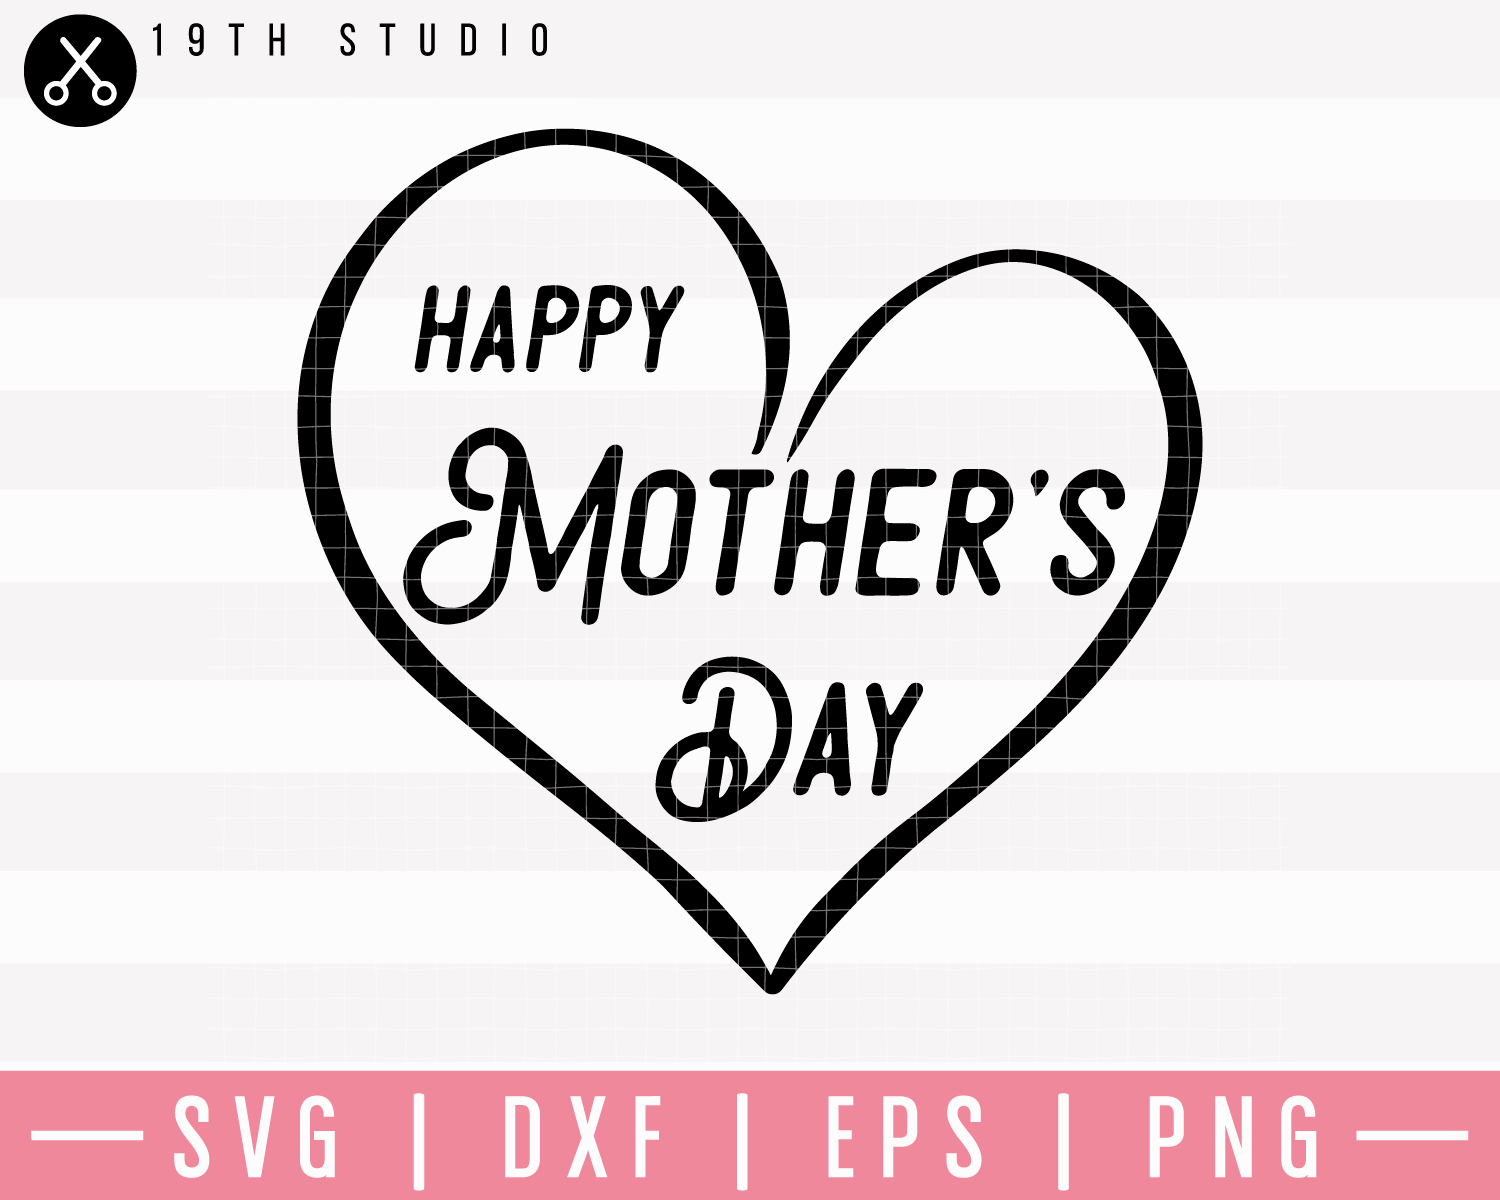 Happy Mother's Day SVG | M23F3 Craft House SVG - SVG files for Cricut and Silhouette